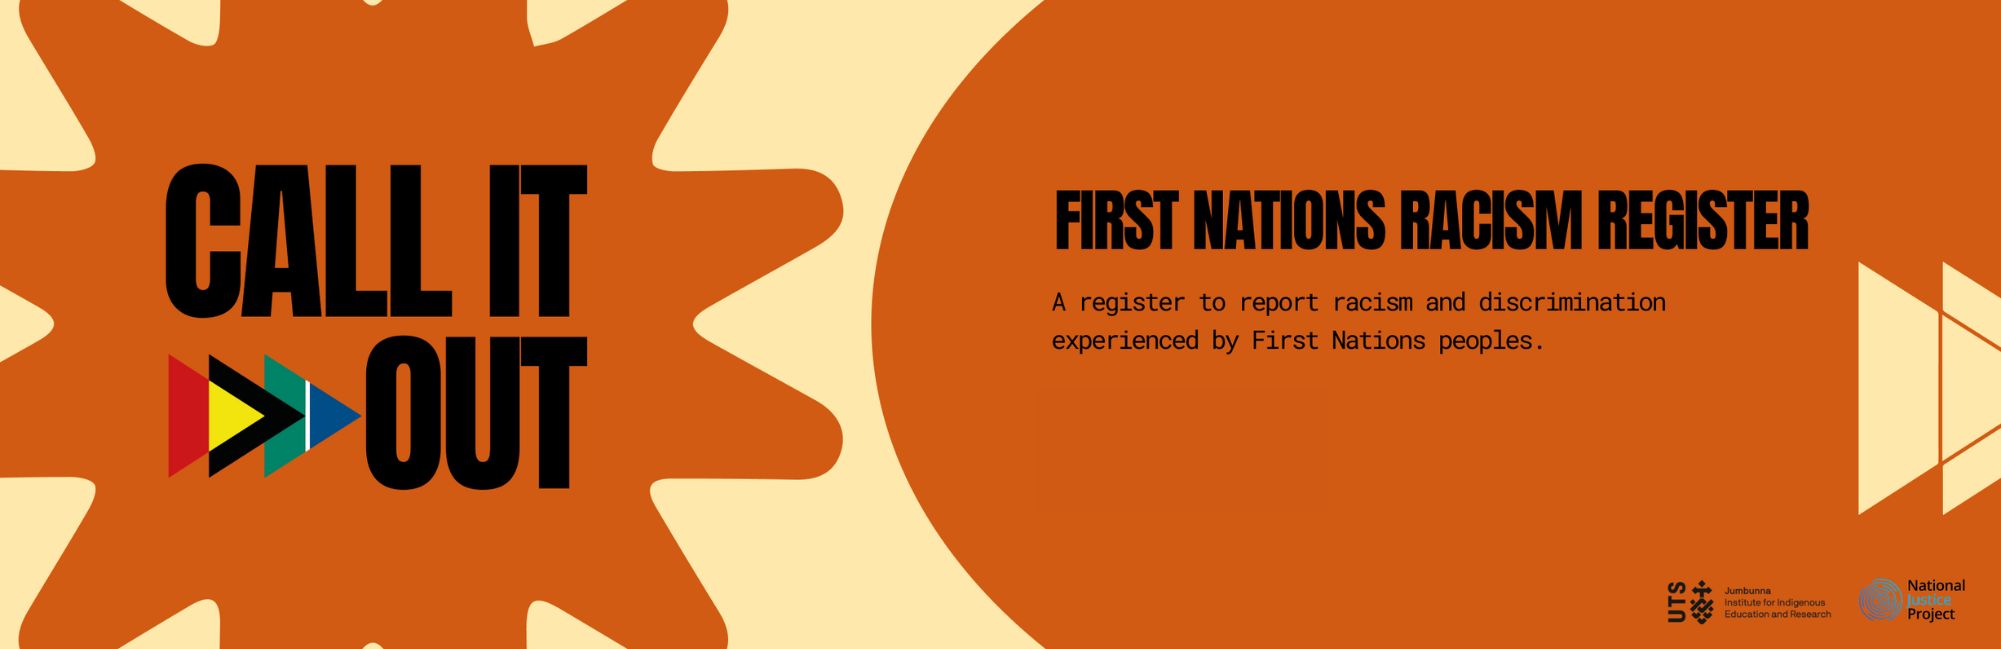 Welcome to the First Nations Racism Register! A register to report racism and discrimination experienced by First Nations Peoples.